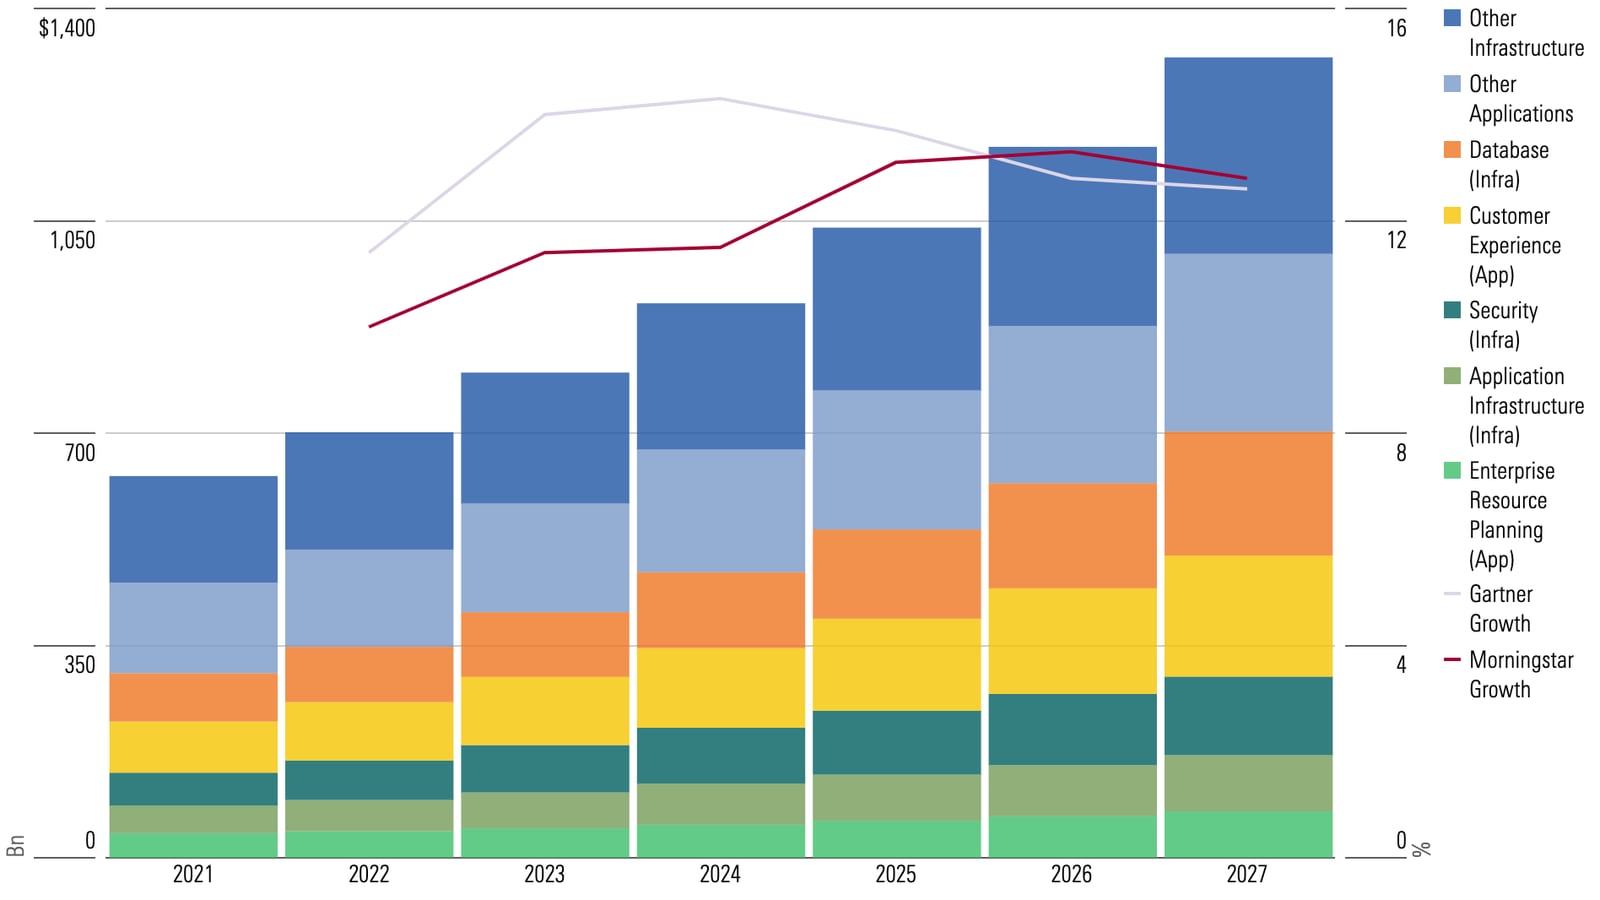 Stacked bar chart showing the expected growth of the subsets of infrastructure and application software through 2027.